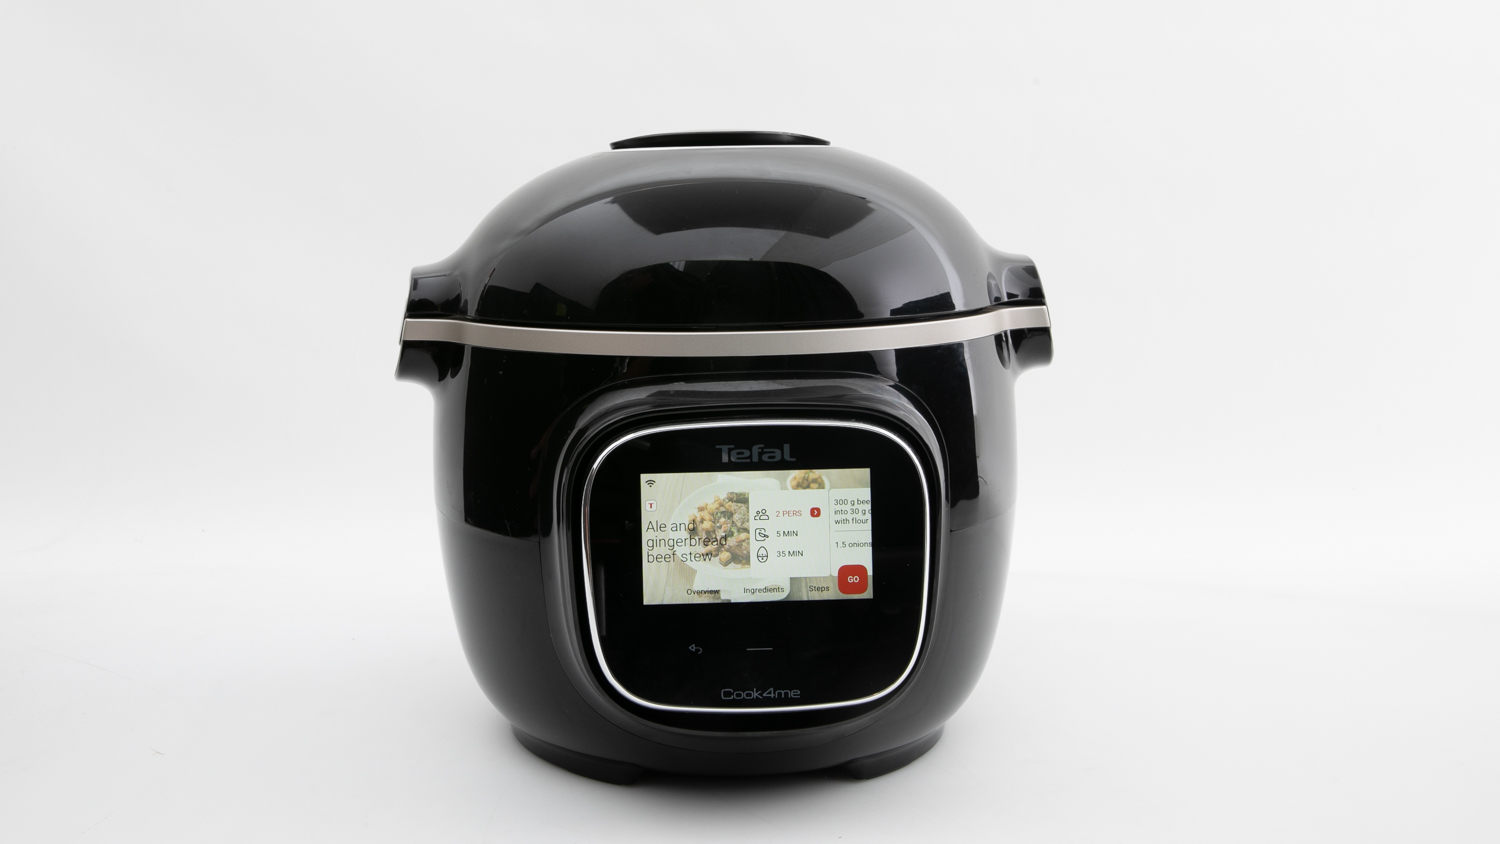 Tefal launches Cook4me Touch Wi-Fi - Appliance Retailer